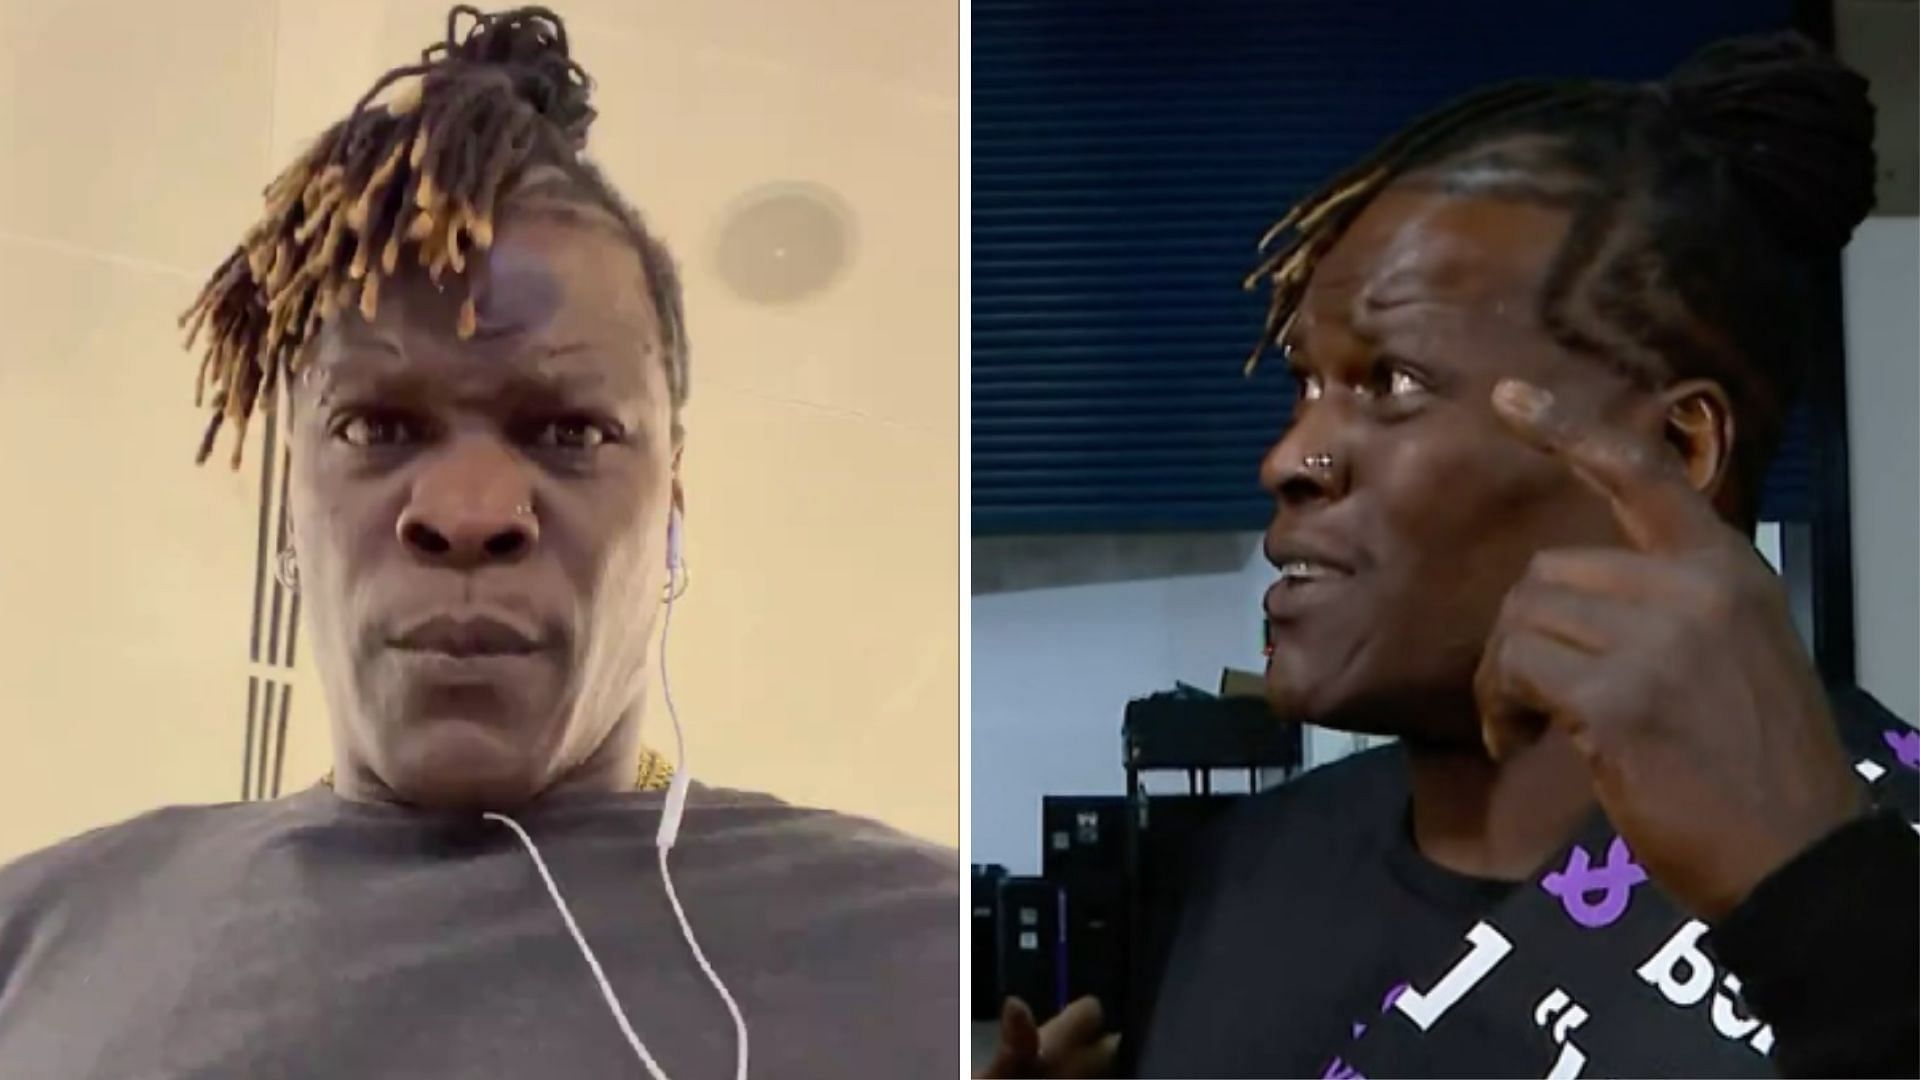 R-Truth is a former WWE 24/7 Champion [Image credits: star